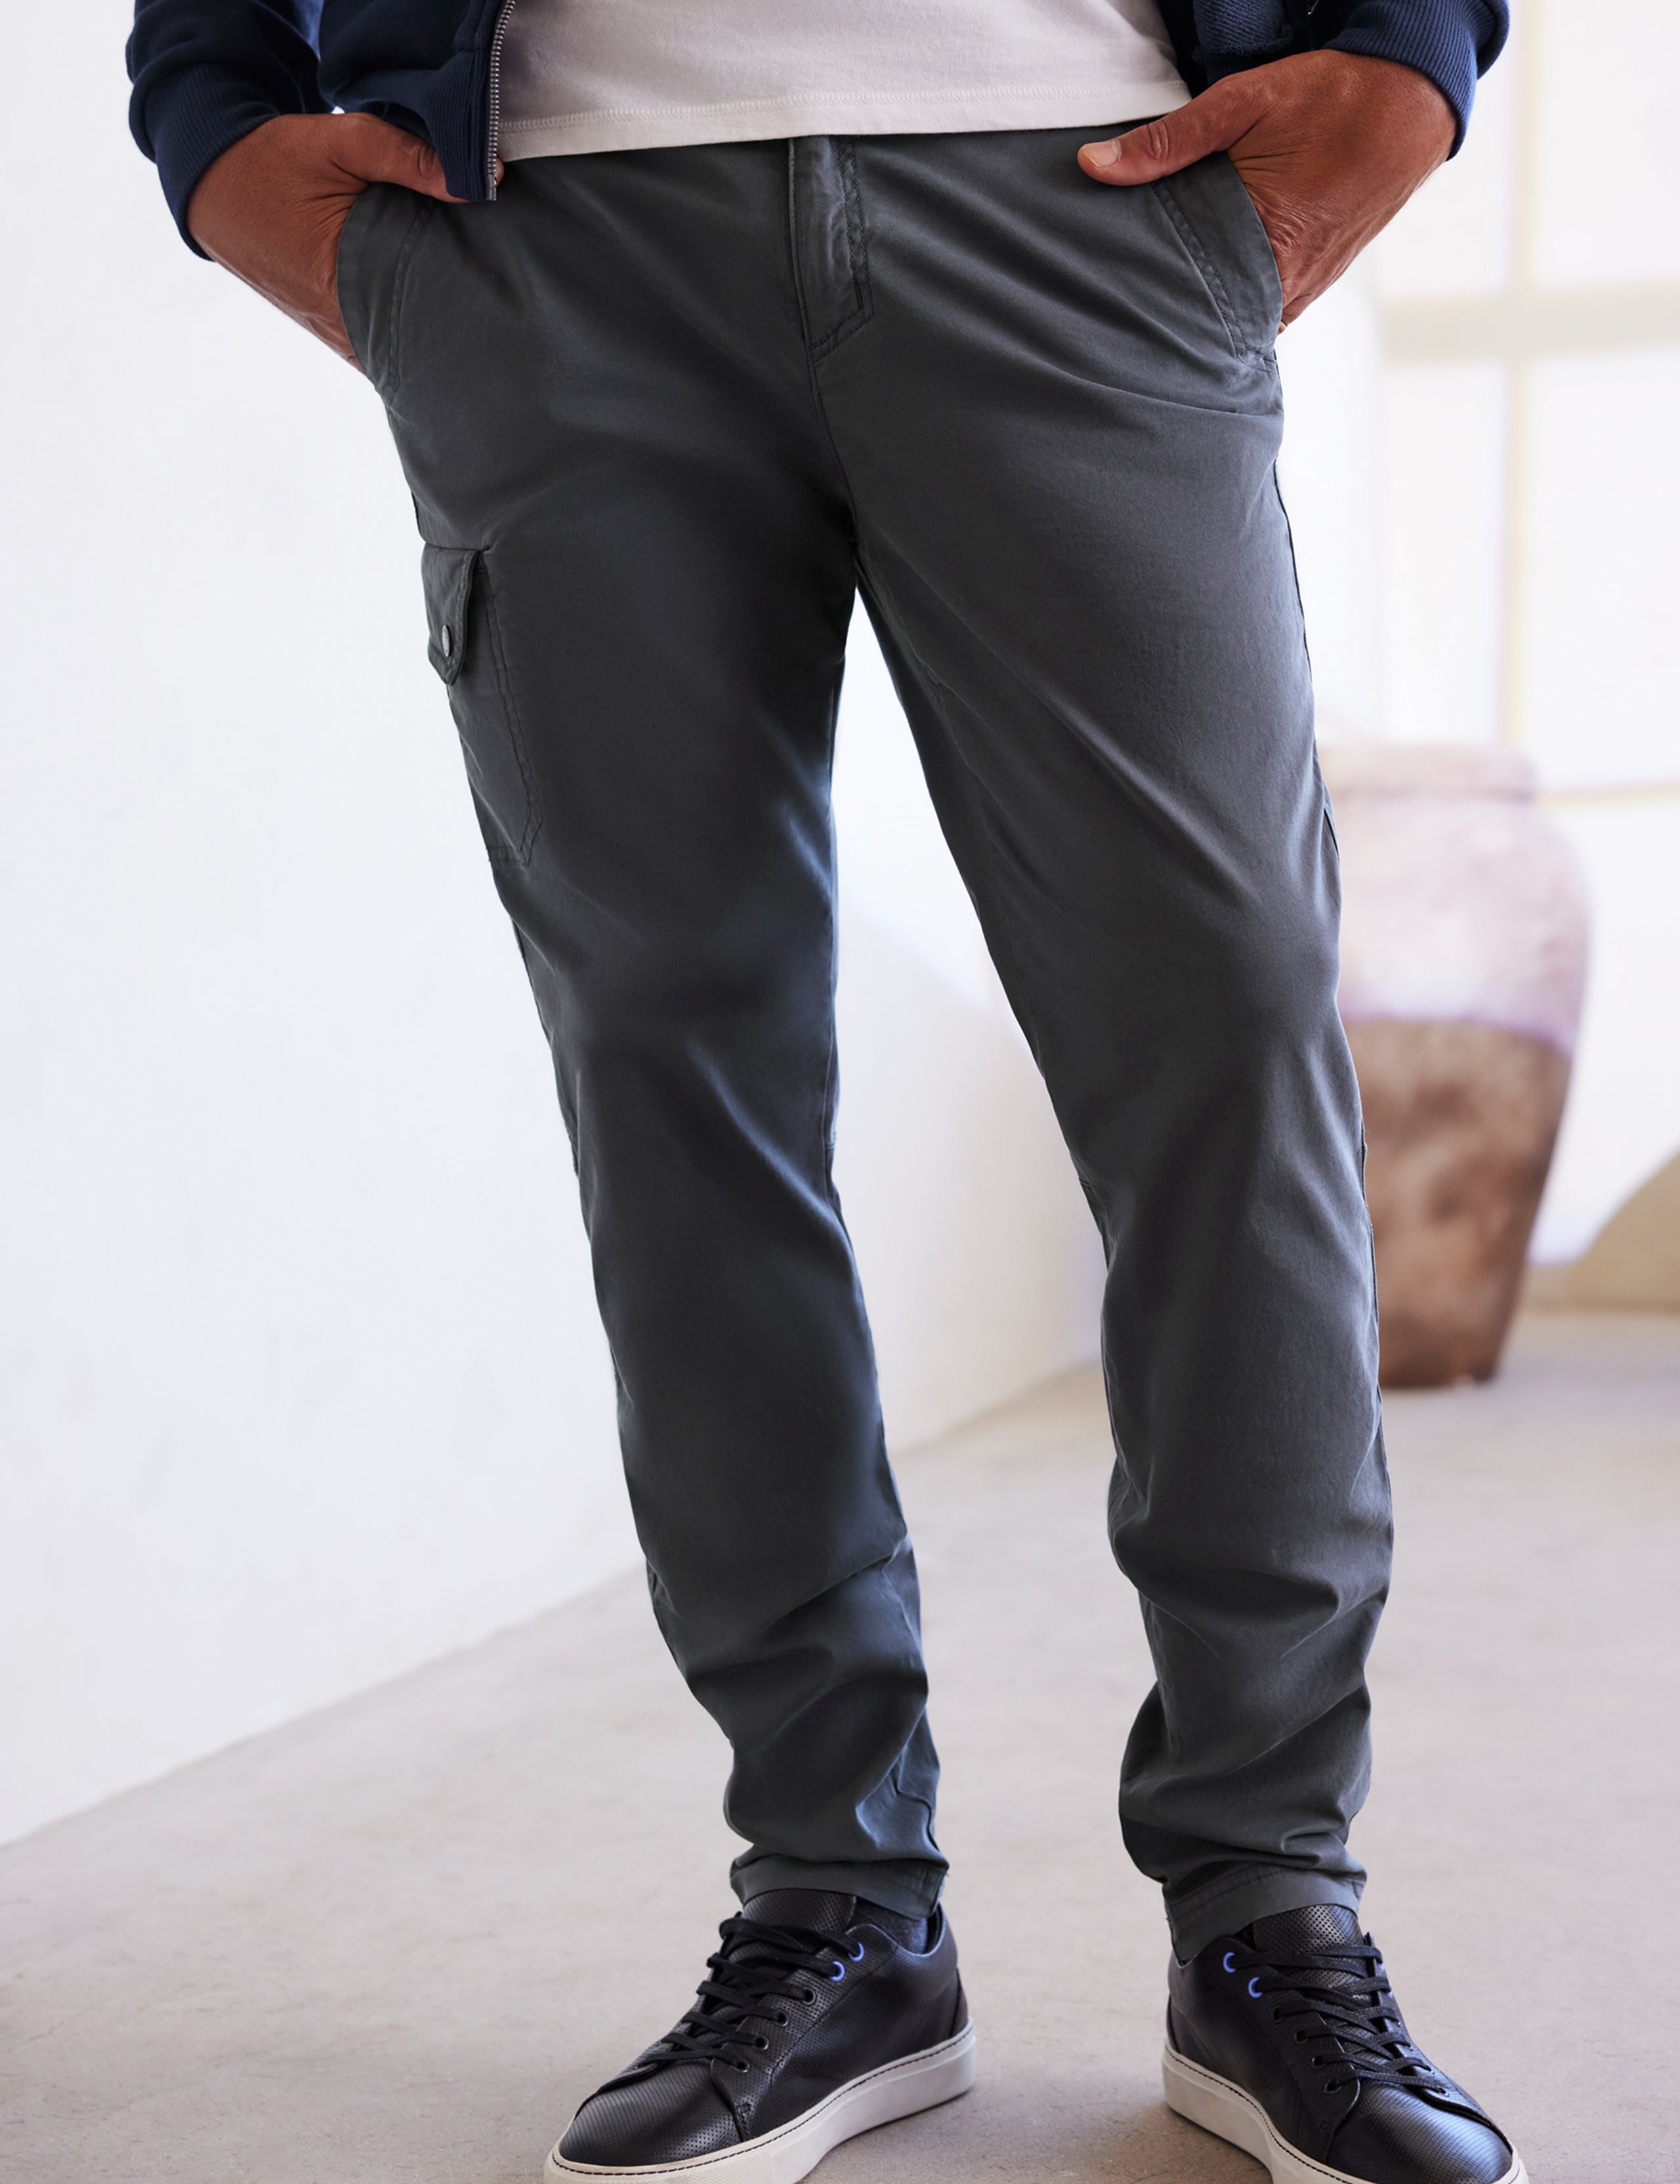 man wearing grey pants from AETHER Apparel